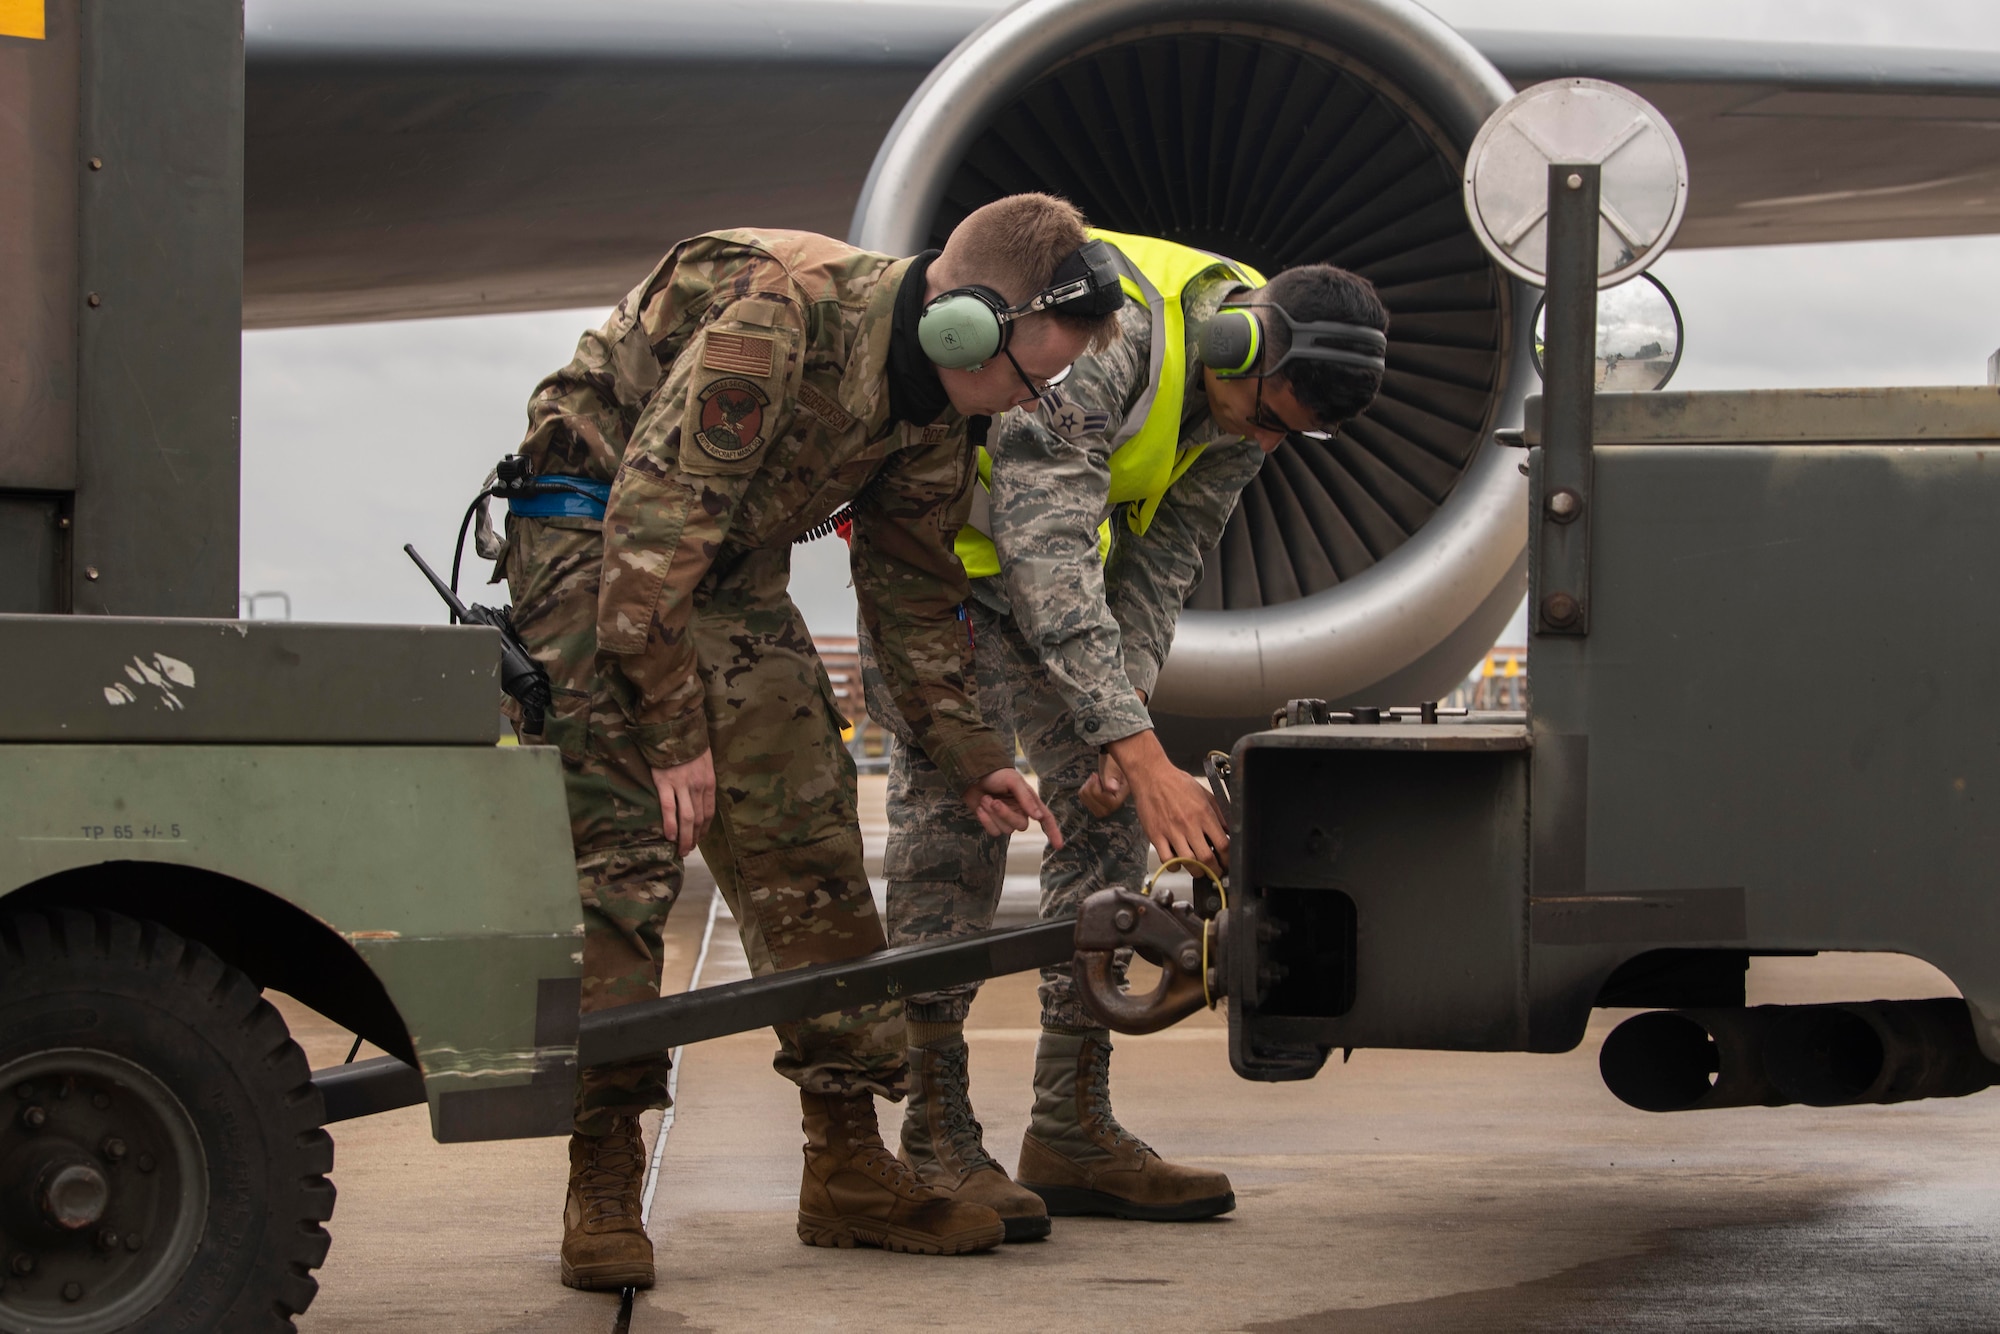 Airman Drake Koenig-Frederickson, 100th Aircraft Maintenance Squadron aerospace propulsion journeyman, left, and Airman 1st Class Nahyan Rivera-Wong, 100th AMXS aerospace propulsion apprentice, connect a generator to a dispatch vehicle in preparation for the launch of a KC-135 Stratotanker aircraft at Royal Air Force Mildenhall, England, Aug. 19, 2020. The 100th Air Refueling Wing conducts air refueling and combat support operations throughout the European and African area of responsibility. (U.S. Air Force photo by Airman 1st Class Joseph Barron)